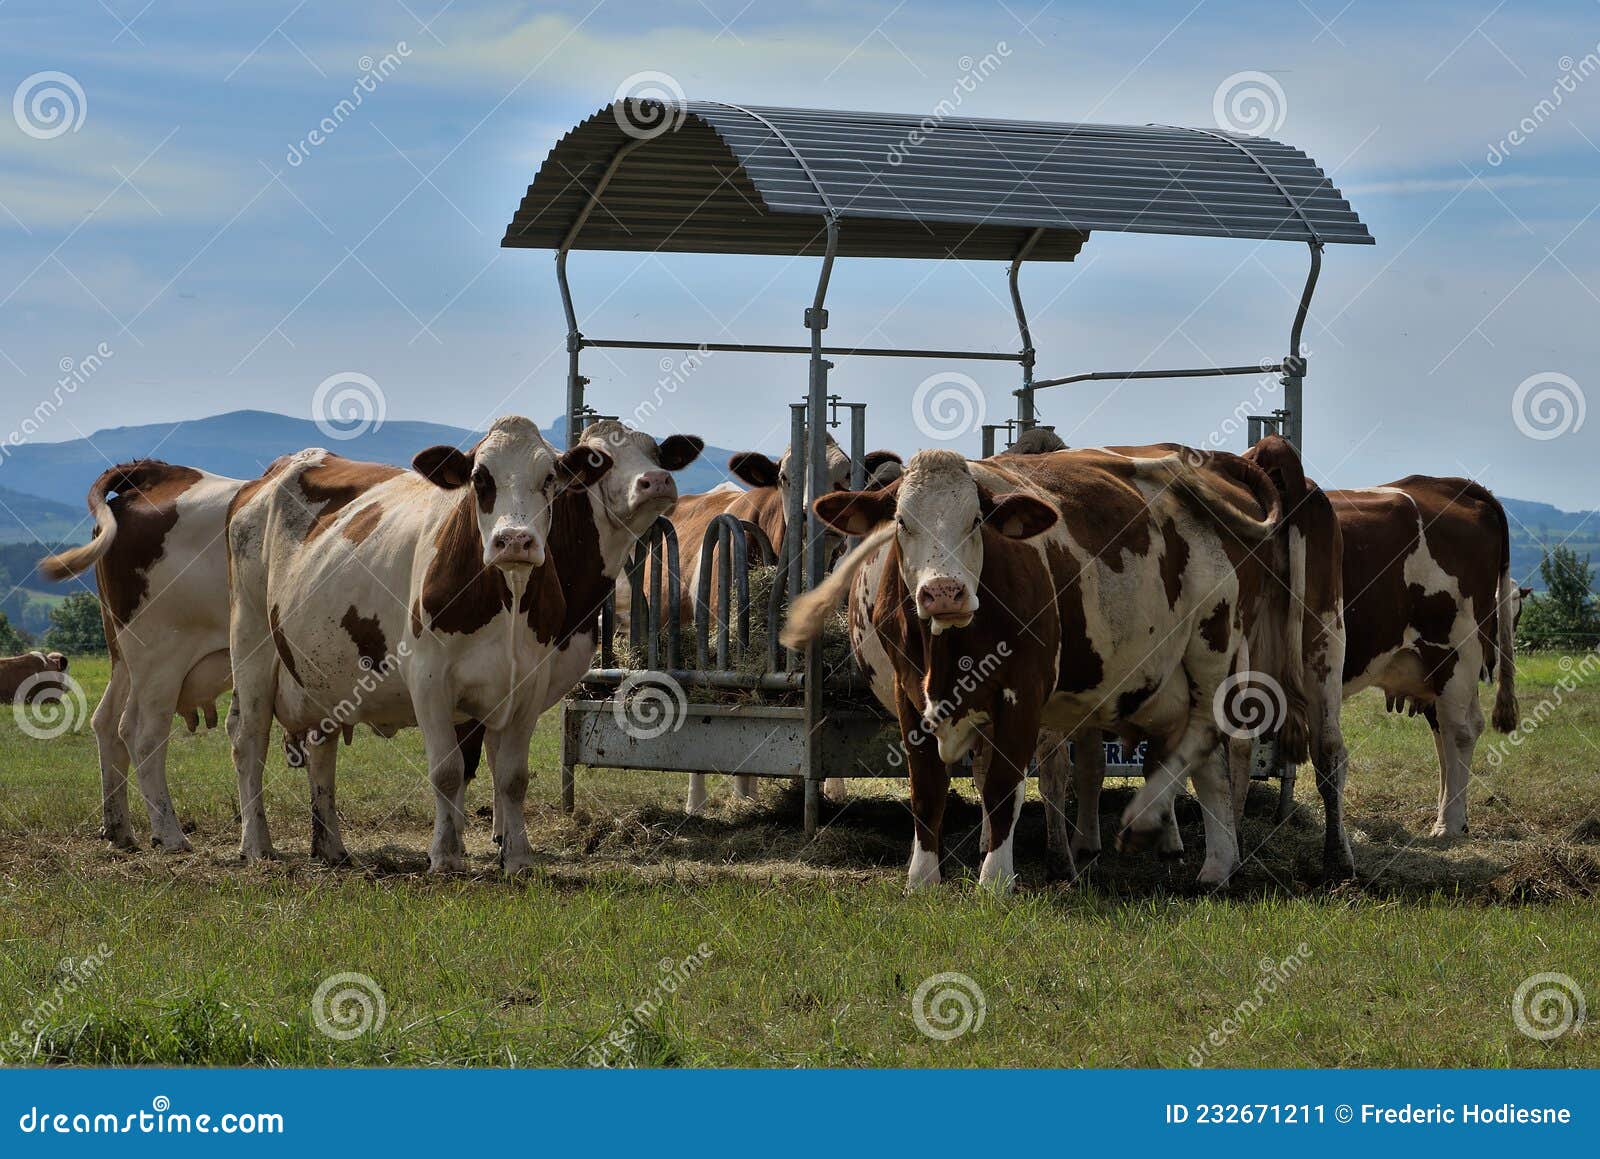 Herd of Norman Cows Around Their Feeder Stock Image - Image of france ...